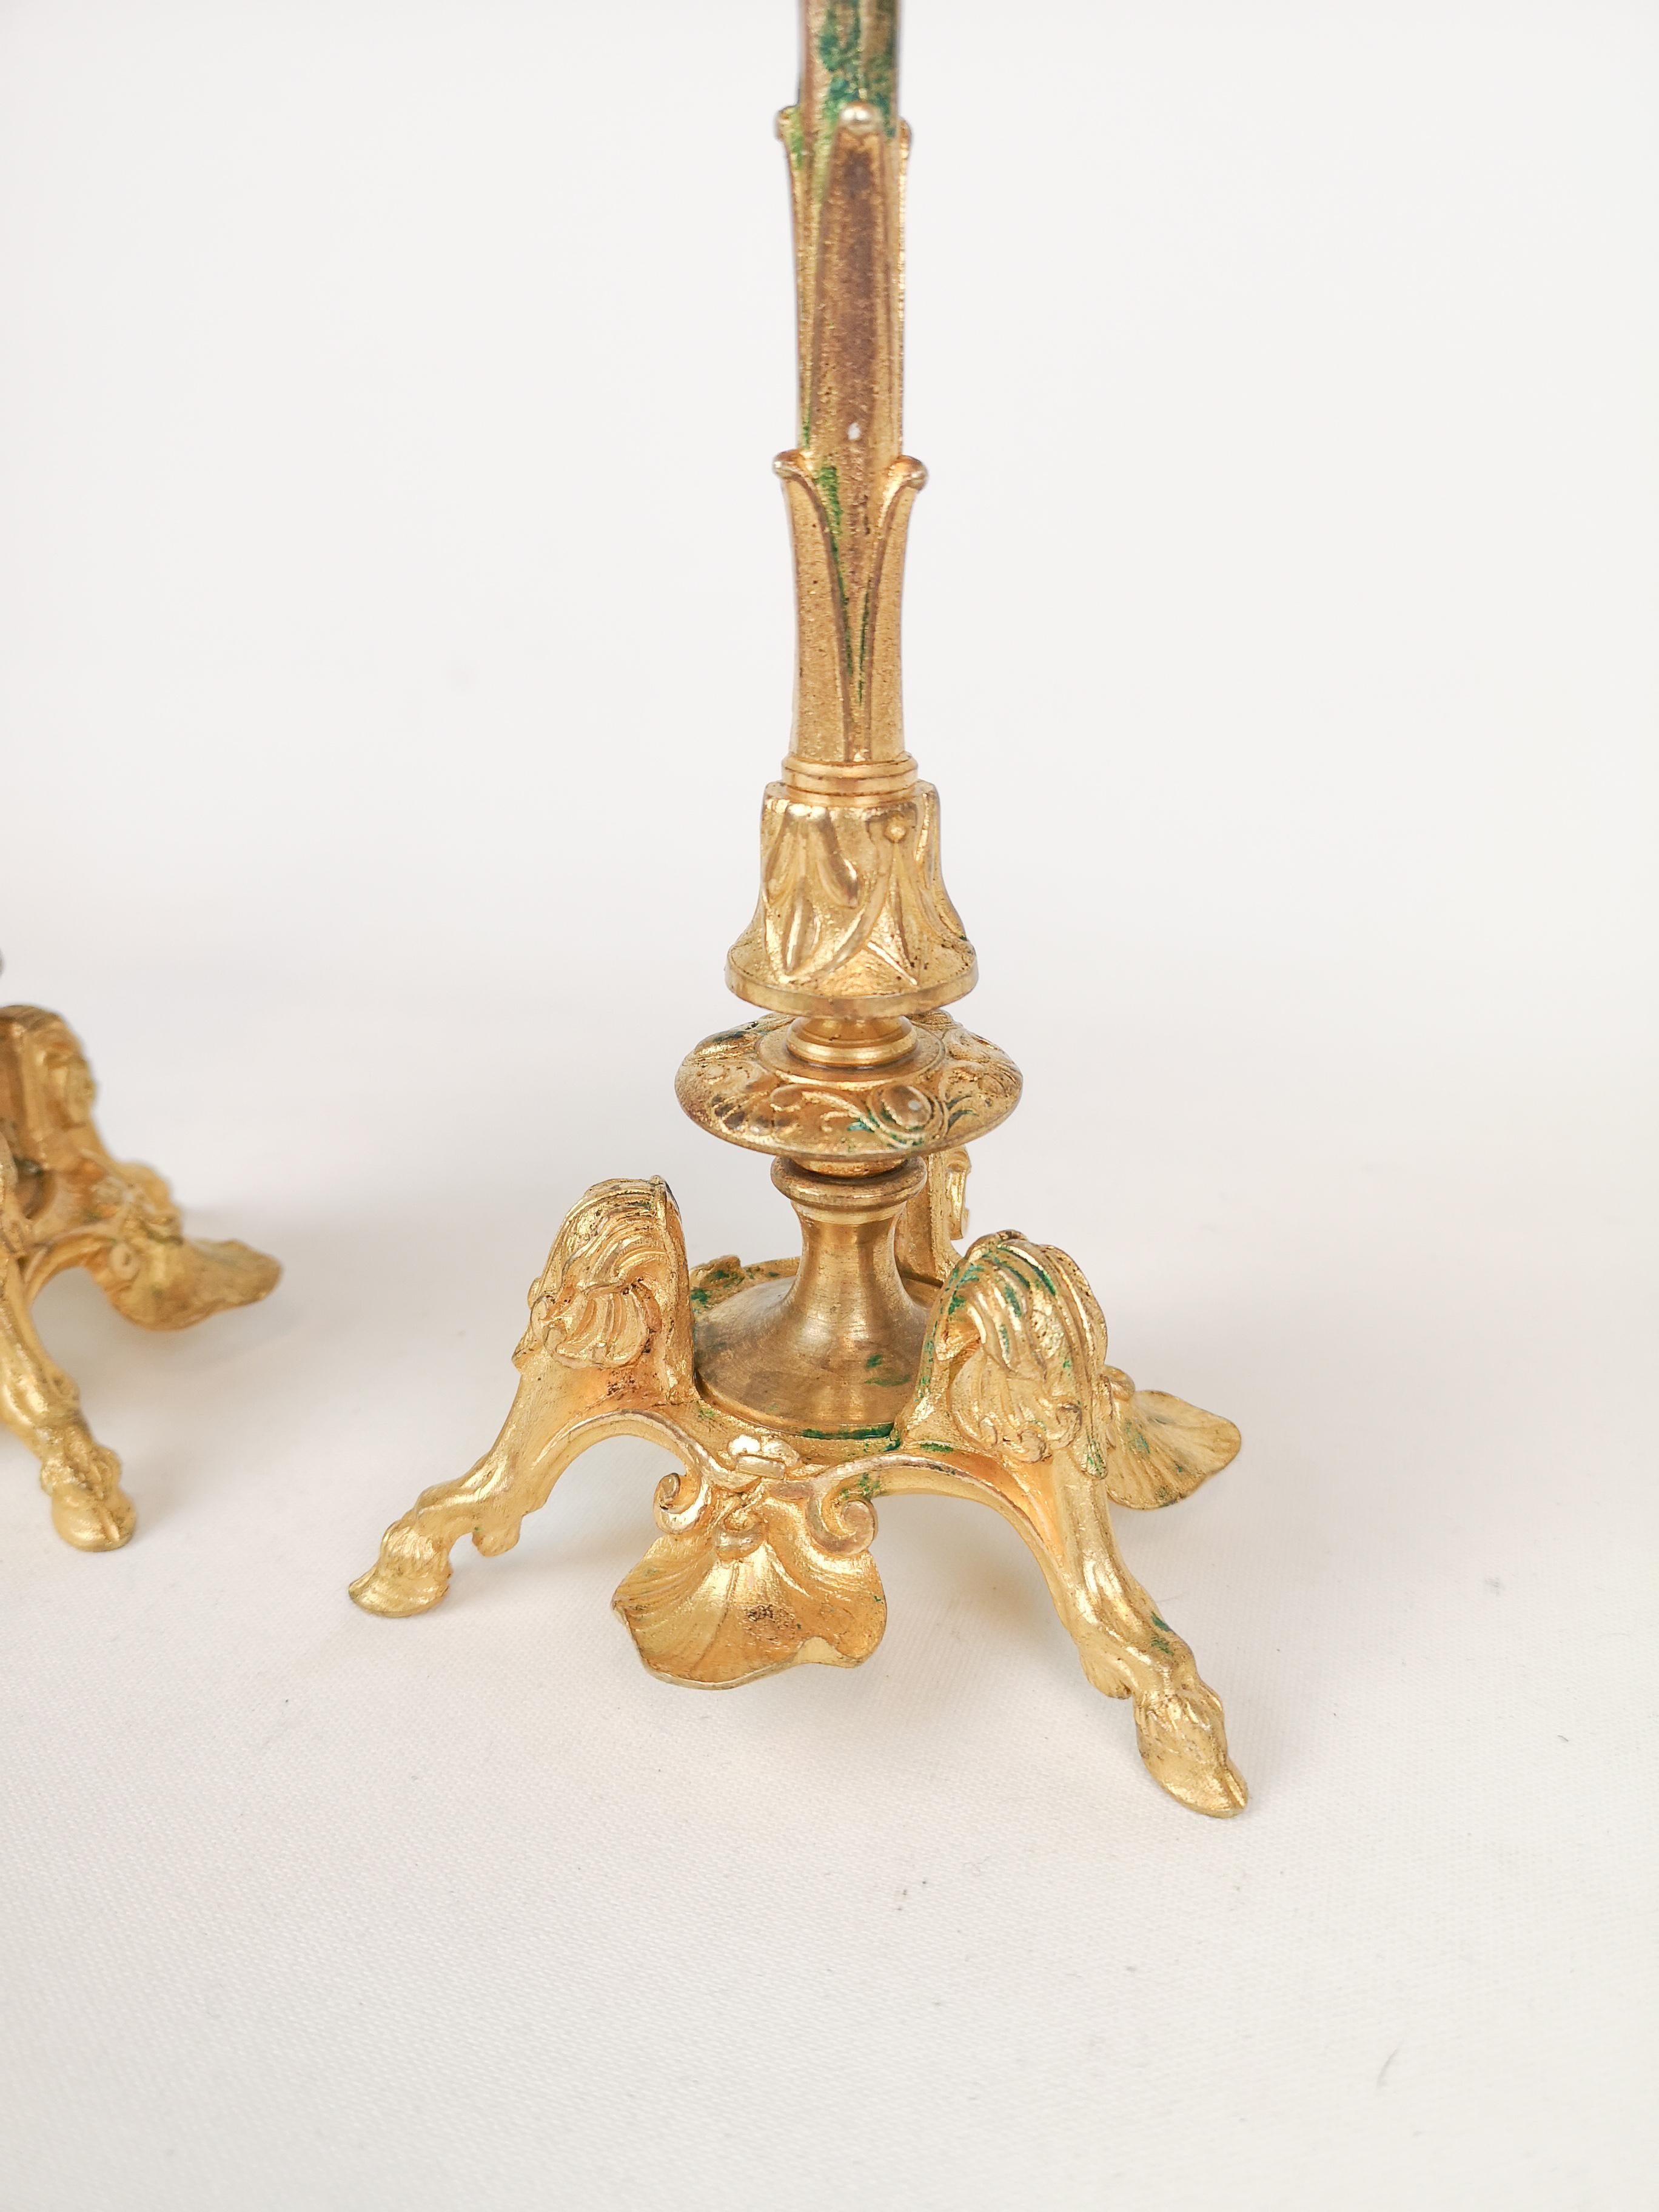 Rococo Revival Pair of Gilt Bronze Candle Sticks 19th Century